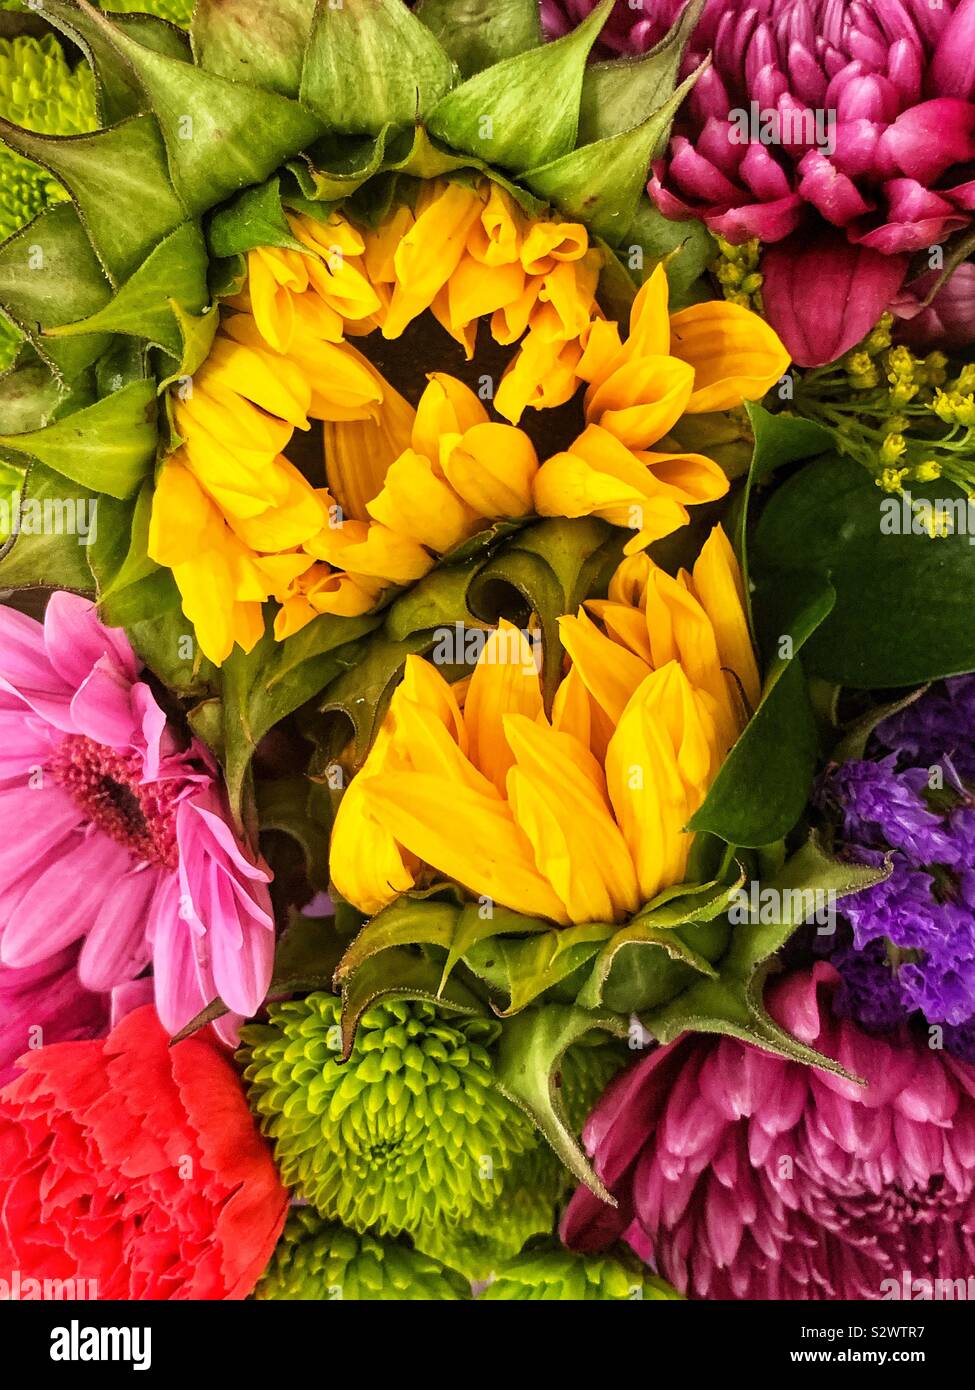 Two yellow sunflowers being smothered in a beautiful bouquet of pink daisies and chrysanthemums. Stock Photo